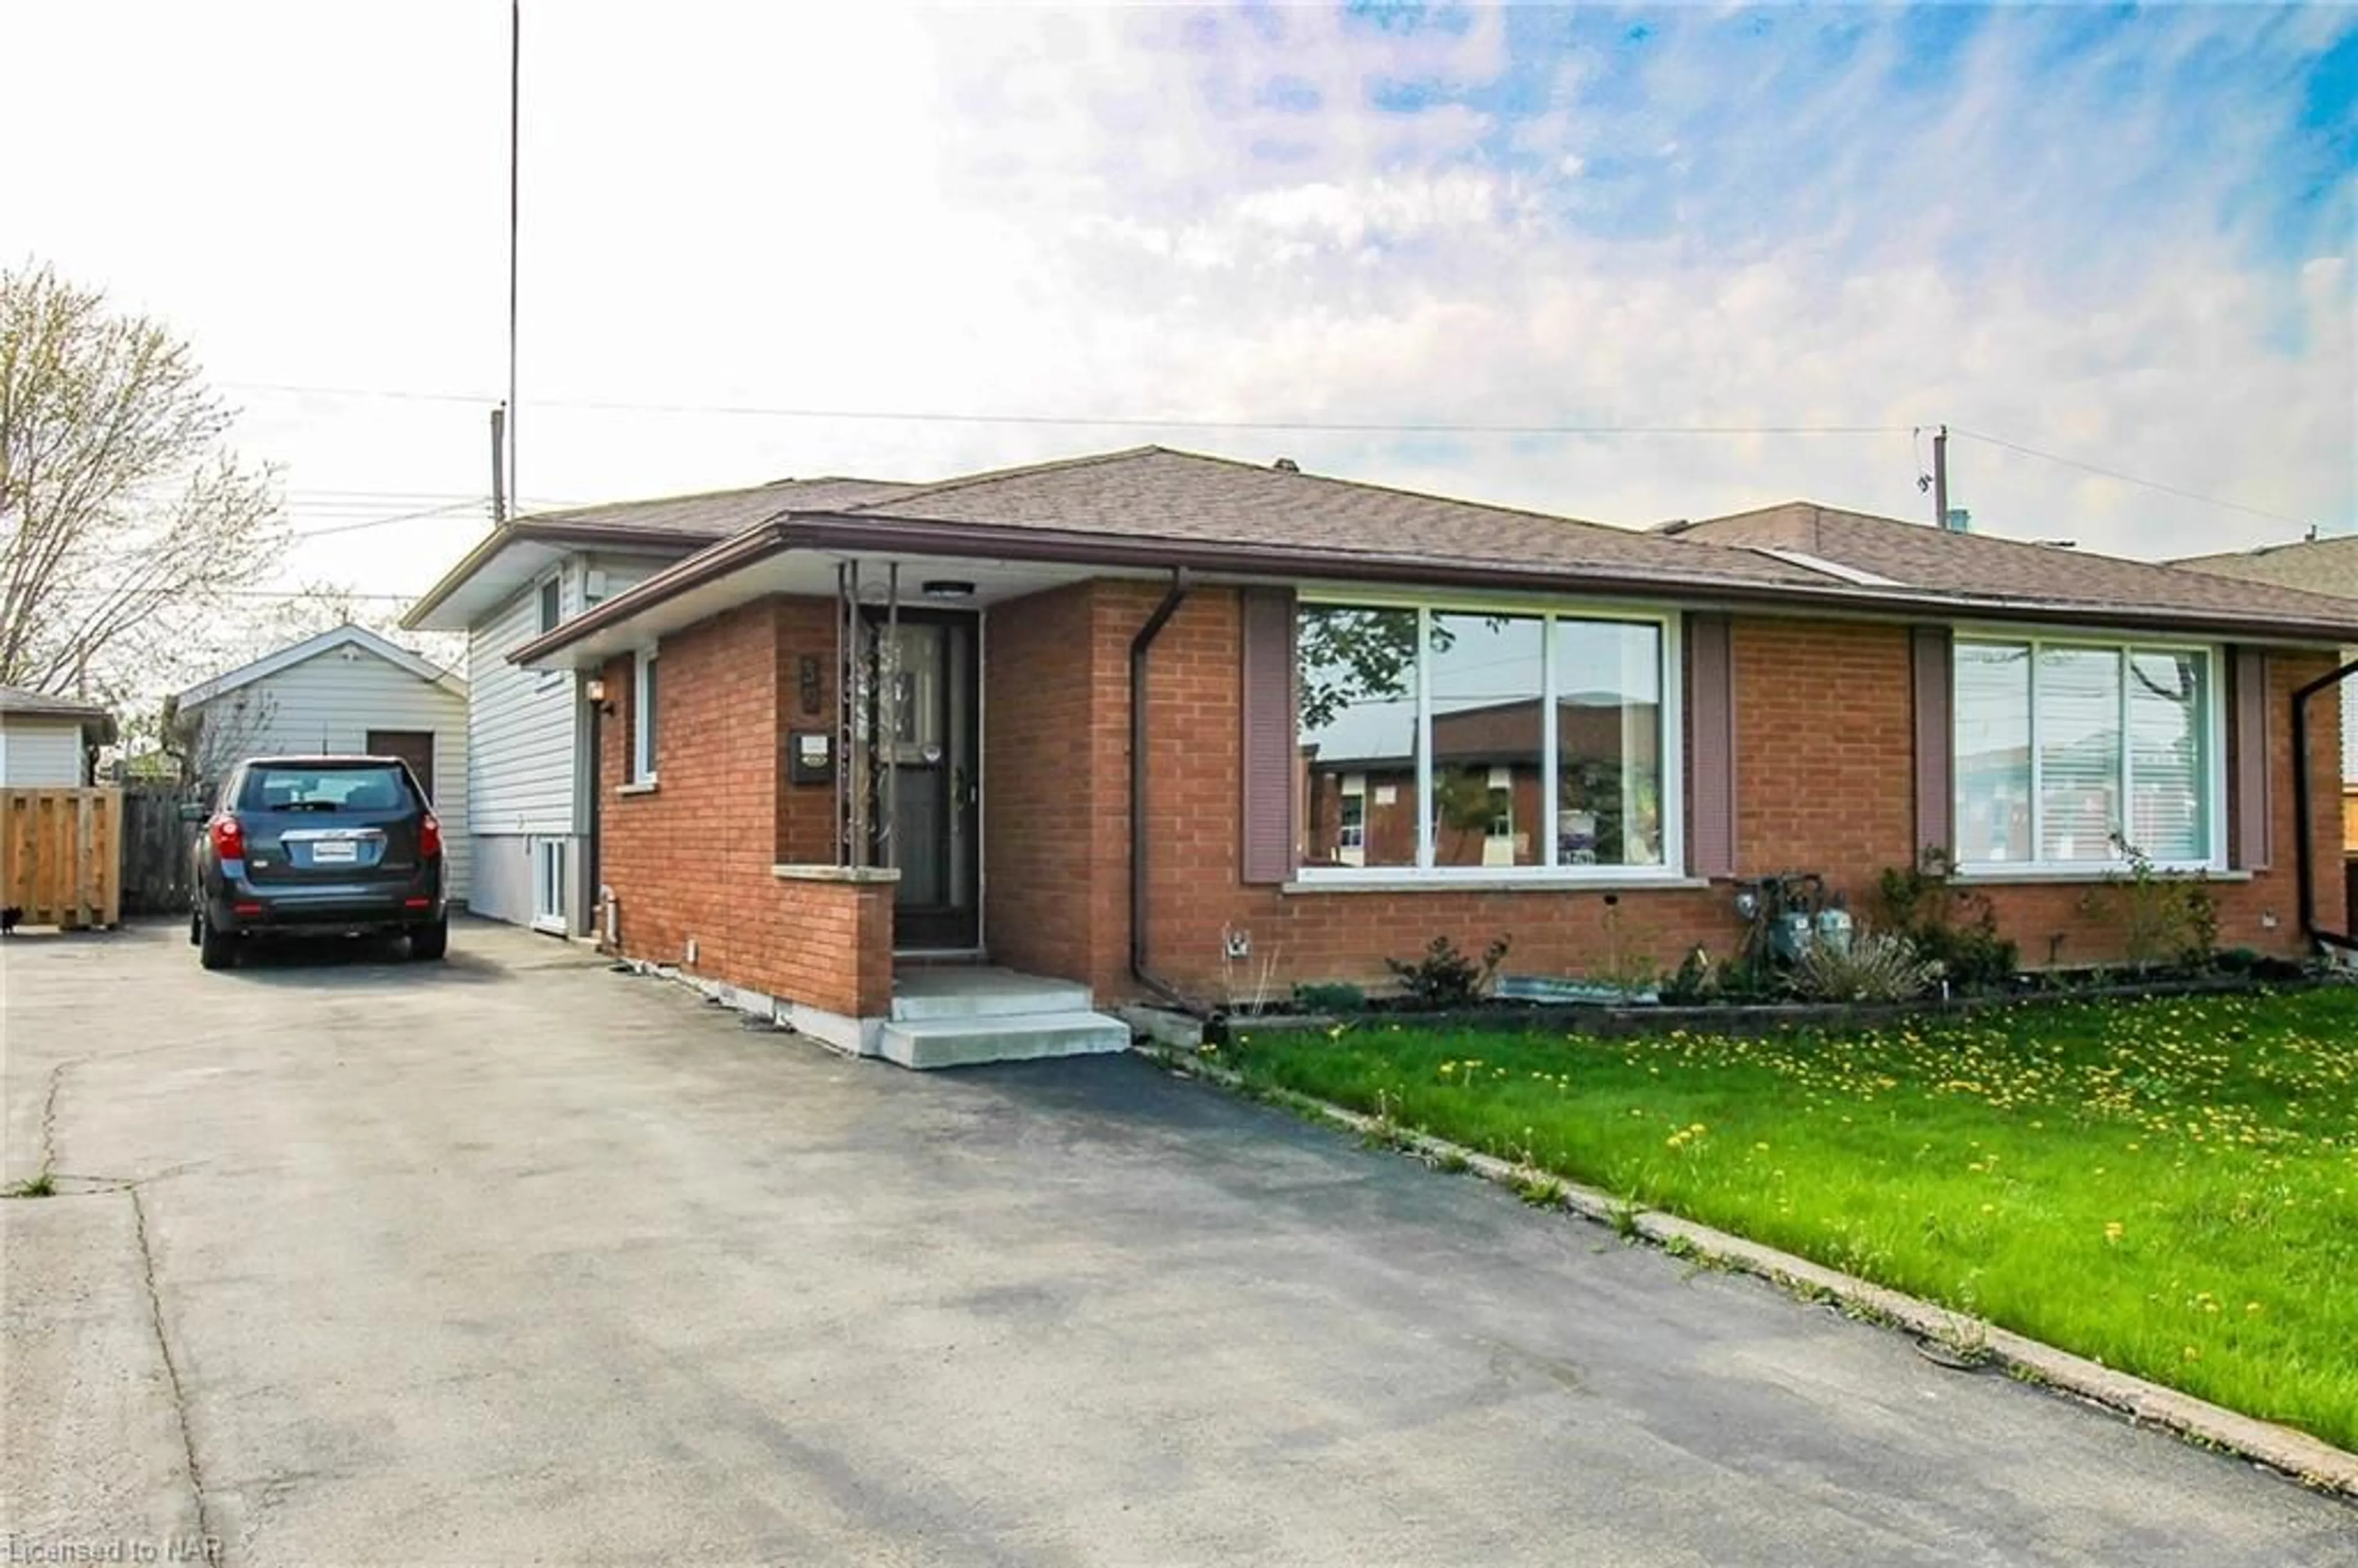 Home with brick exterior material for 39 St Andrews Ave, Welland Ontario L3B 1E3